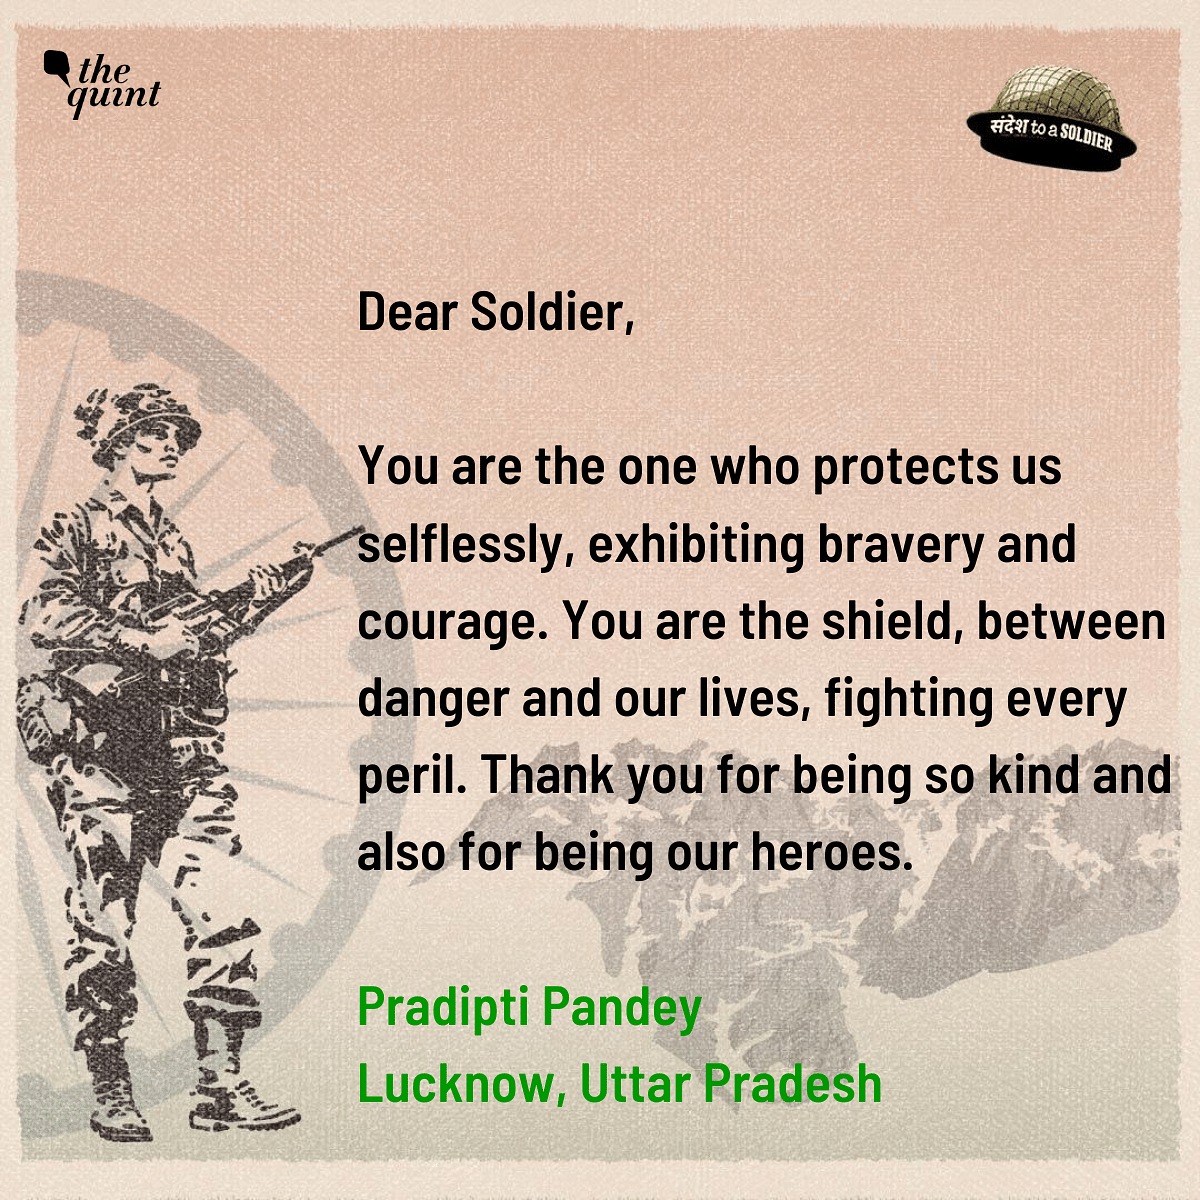 Citizens from India pen down their sandesh to soldiers, thanking them for their selflessness and courage.